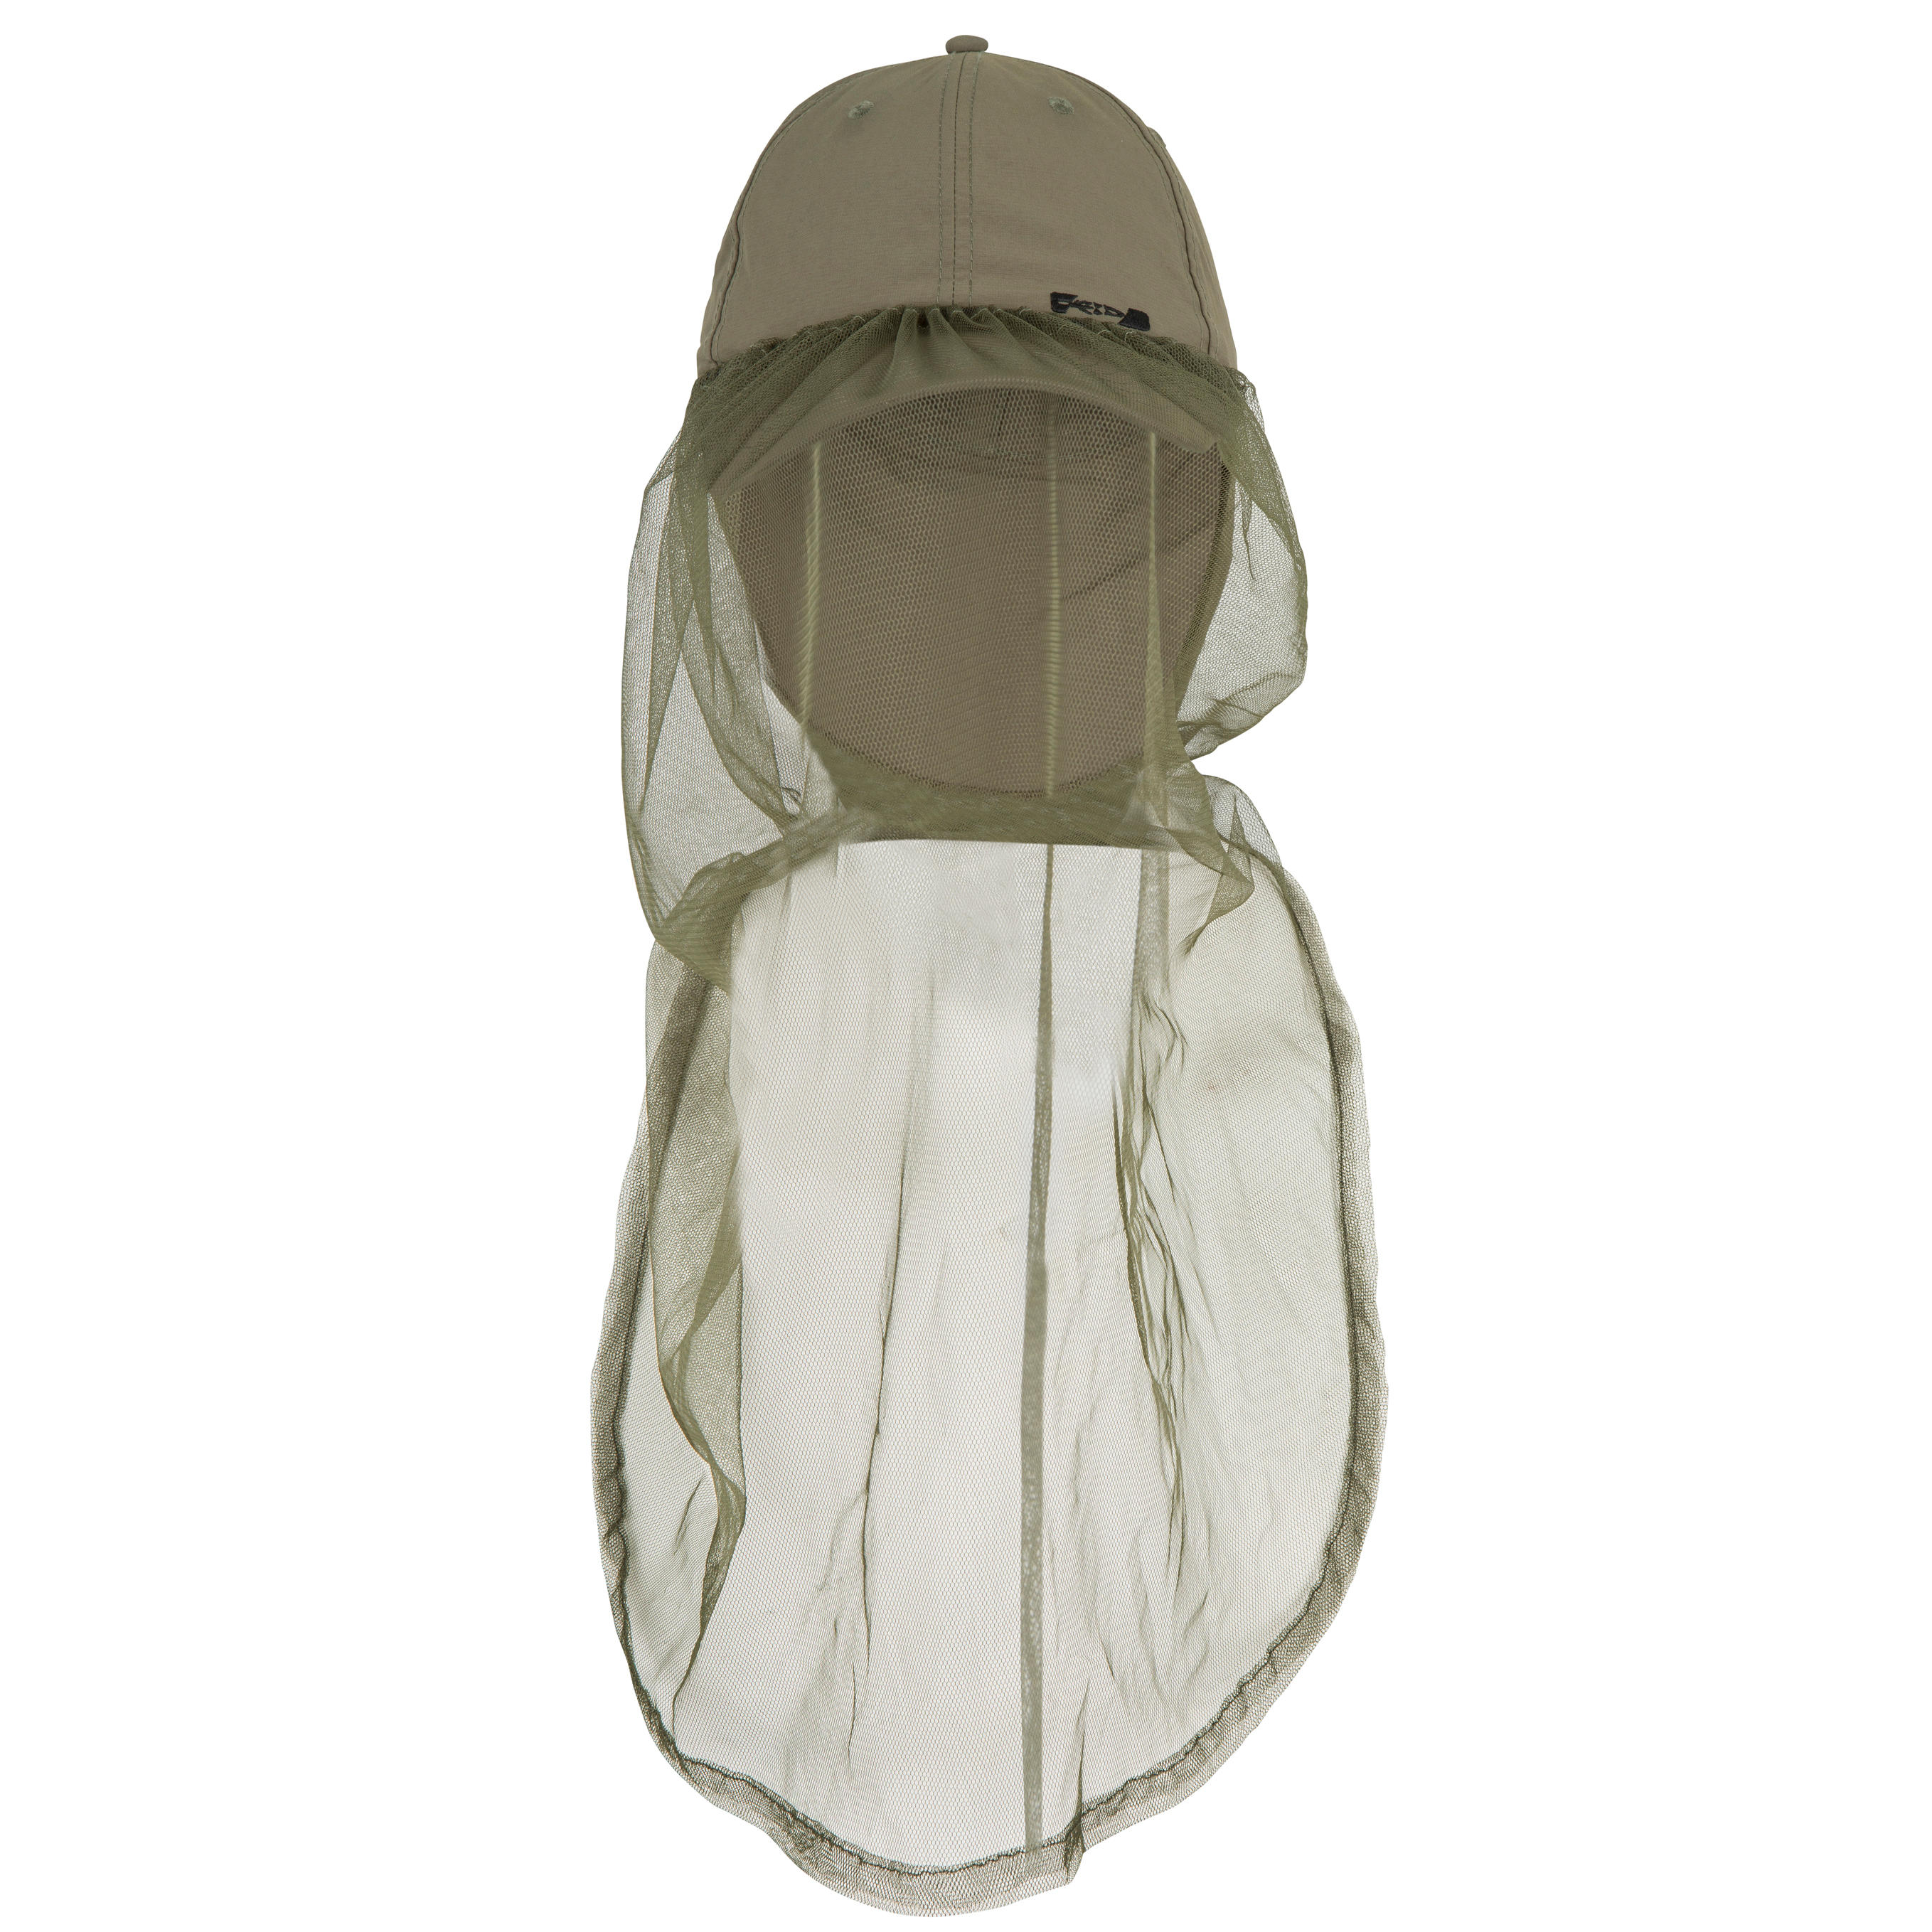 Mosquito Hunting Cap - Steppe 300 Green - SOLOGNAC